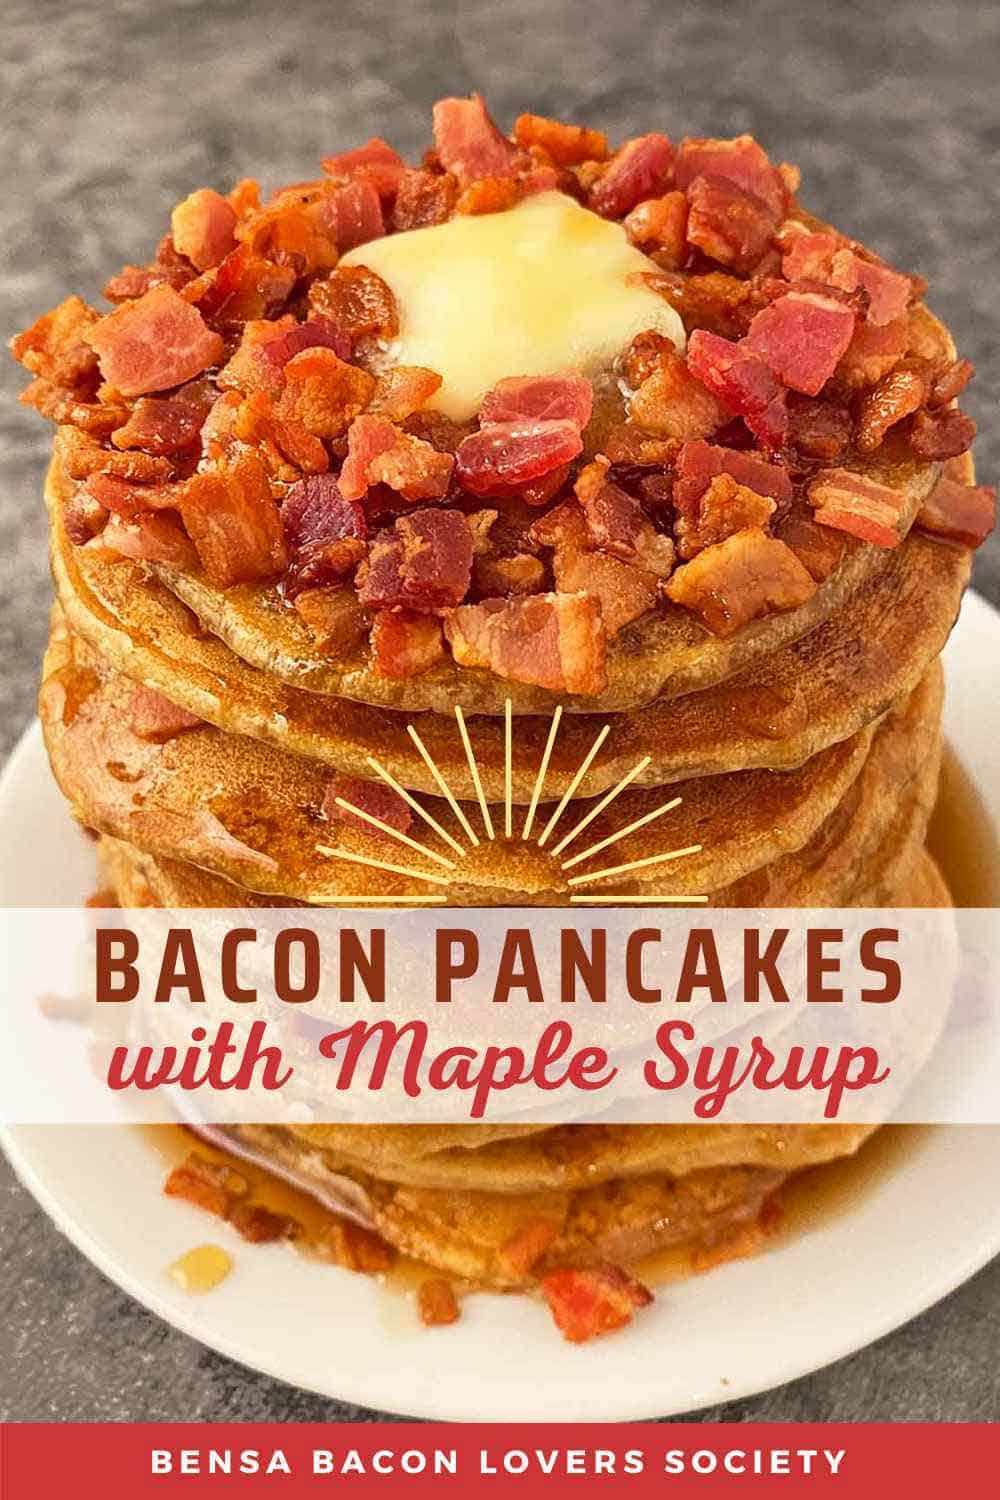 A tall stack of bacon pancakes with maple syrup.